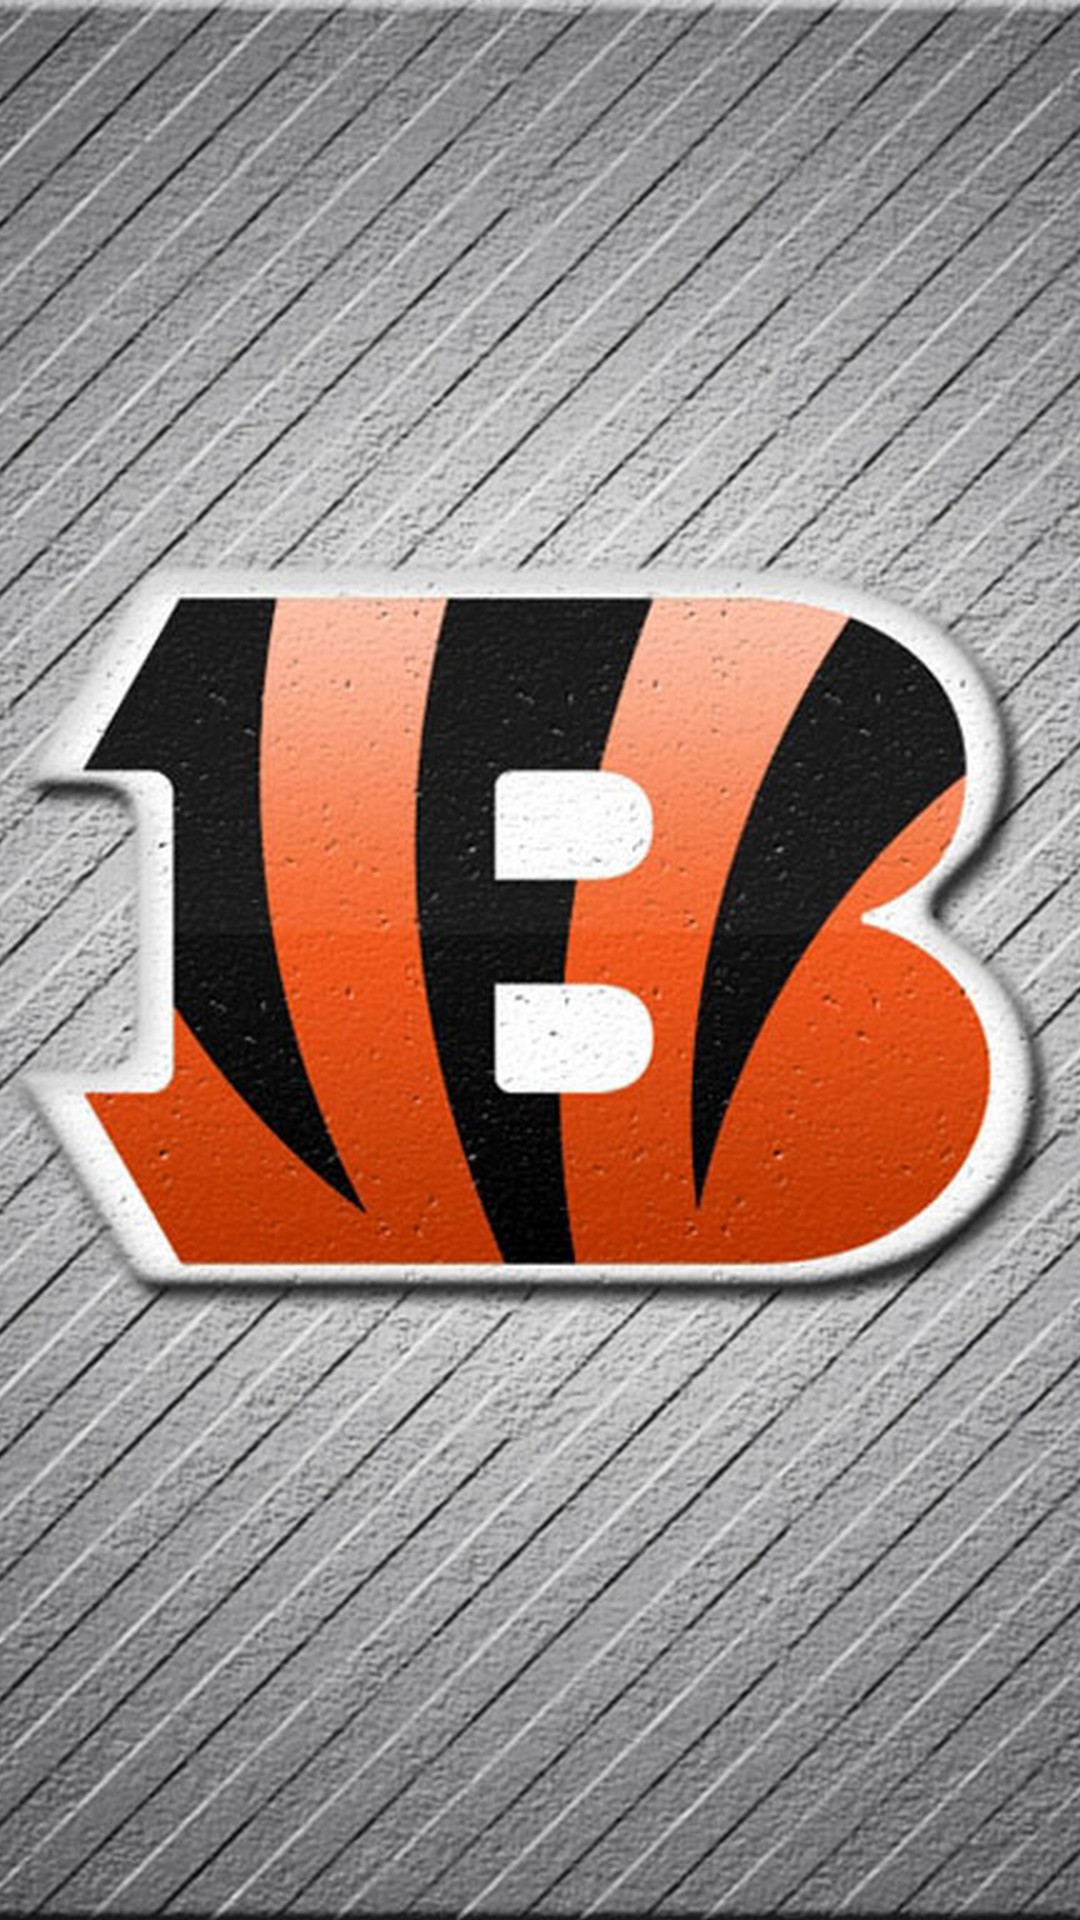 Cincinnati Bengals iPhone Backgrounds With high-resolution 1080X1920 pixel. Download and set as wallpaper for Apple iPhone X, XS Max, XR, 8, 7, 6, SE, iPad, Android